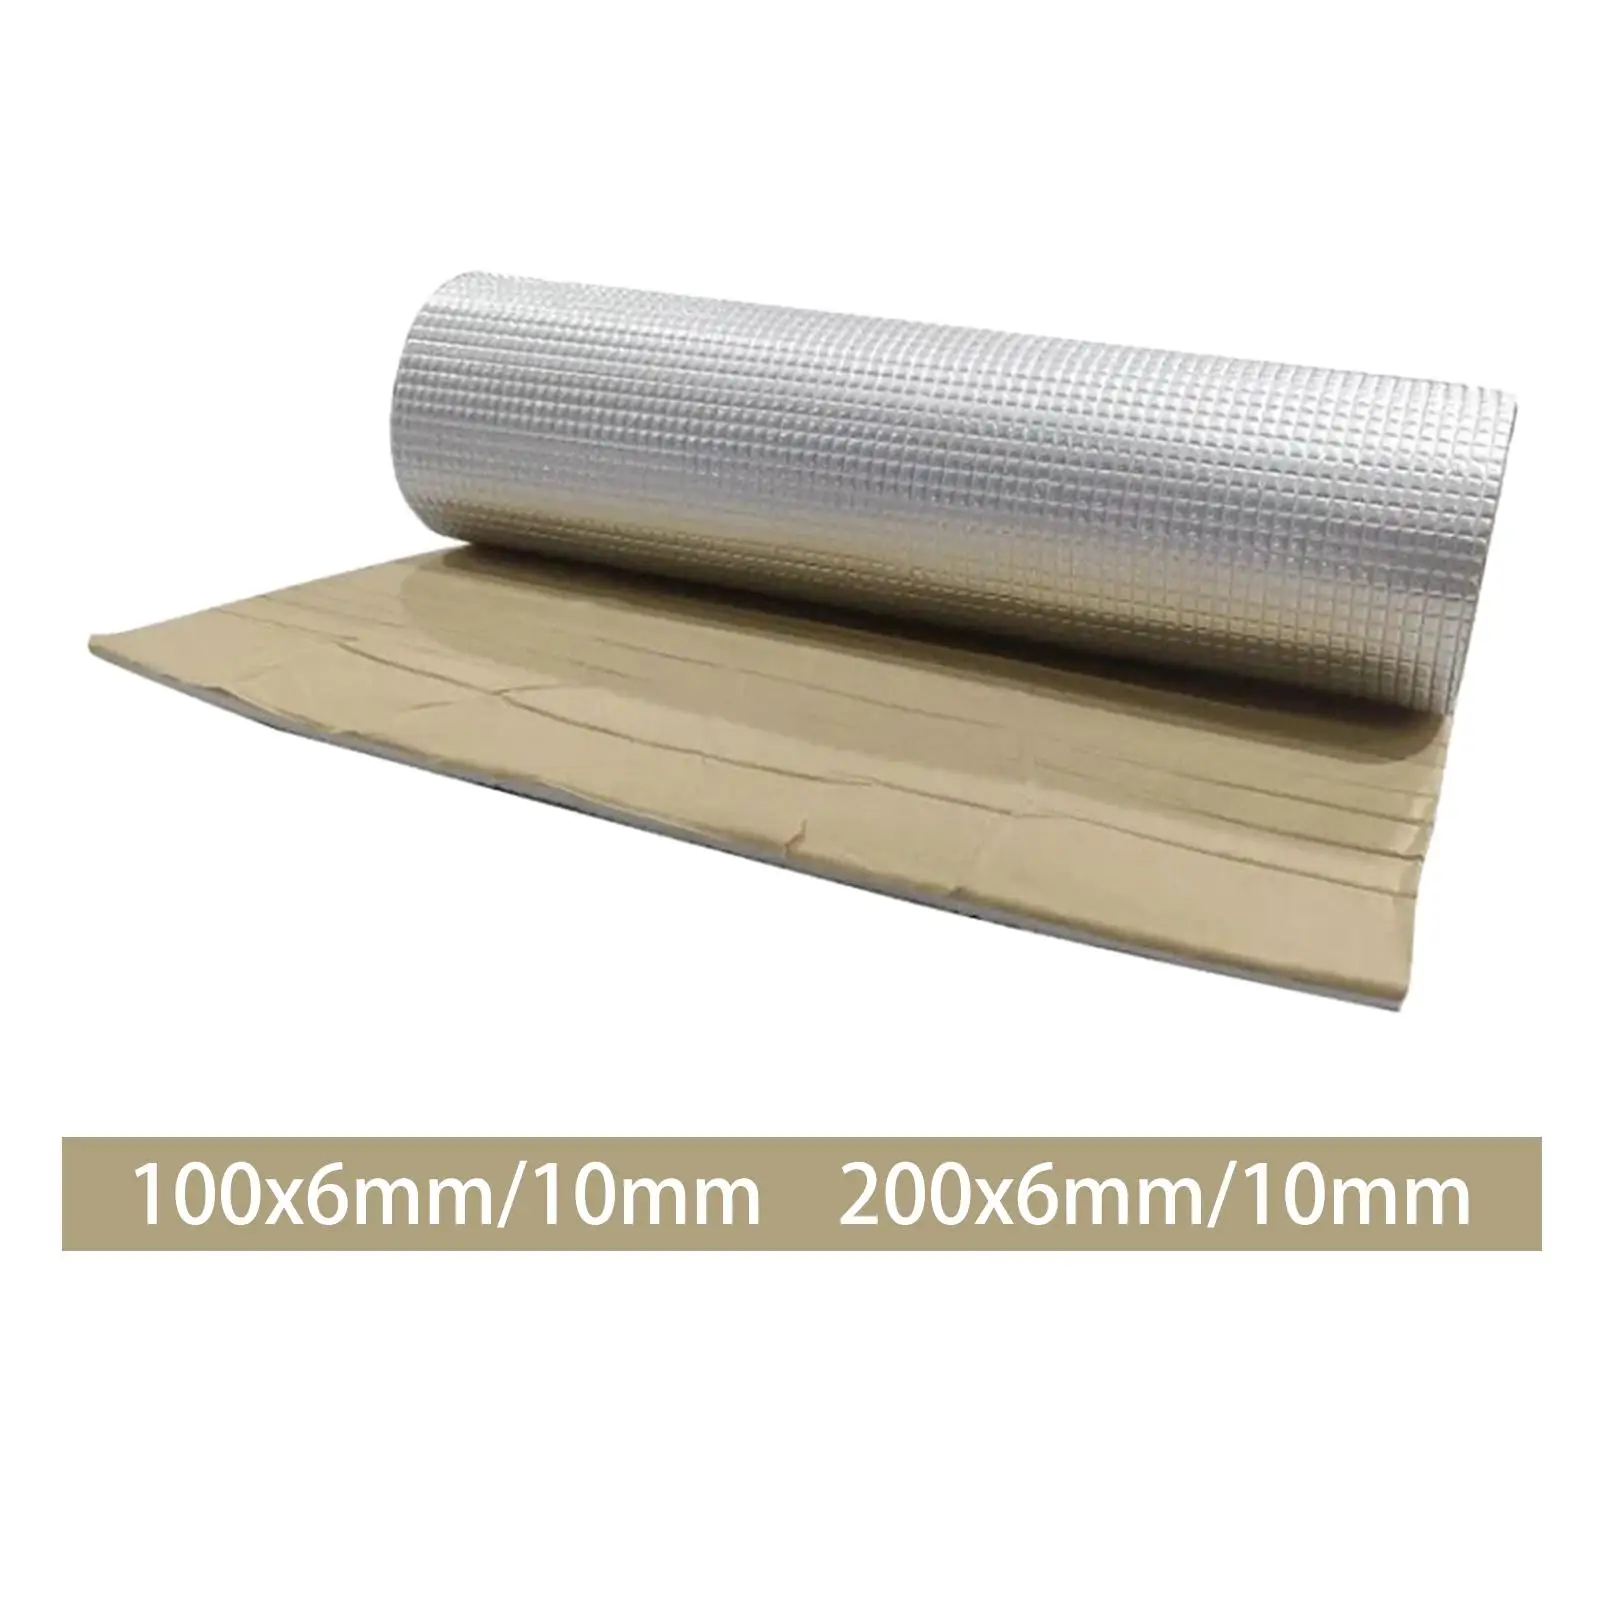 Audio Noise Insulation and Dampening Replacement Heat Shield Sound Deadener